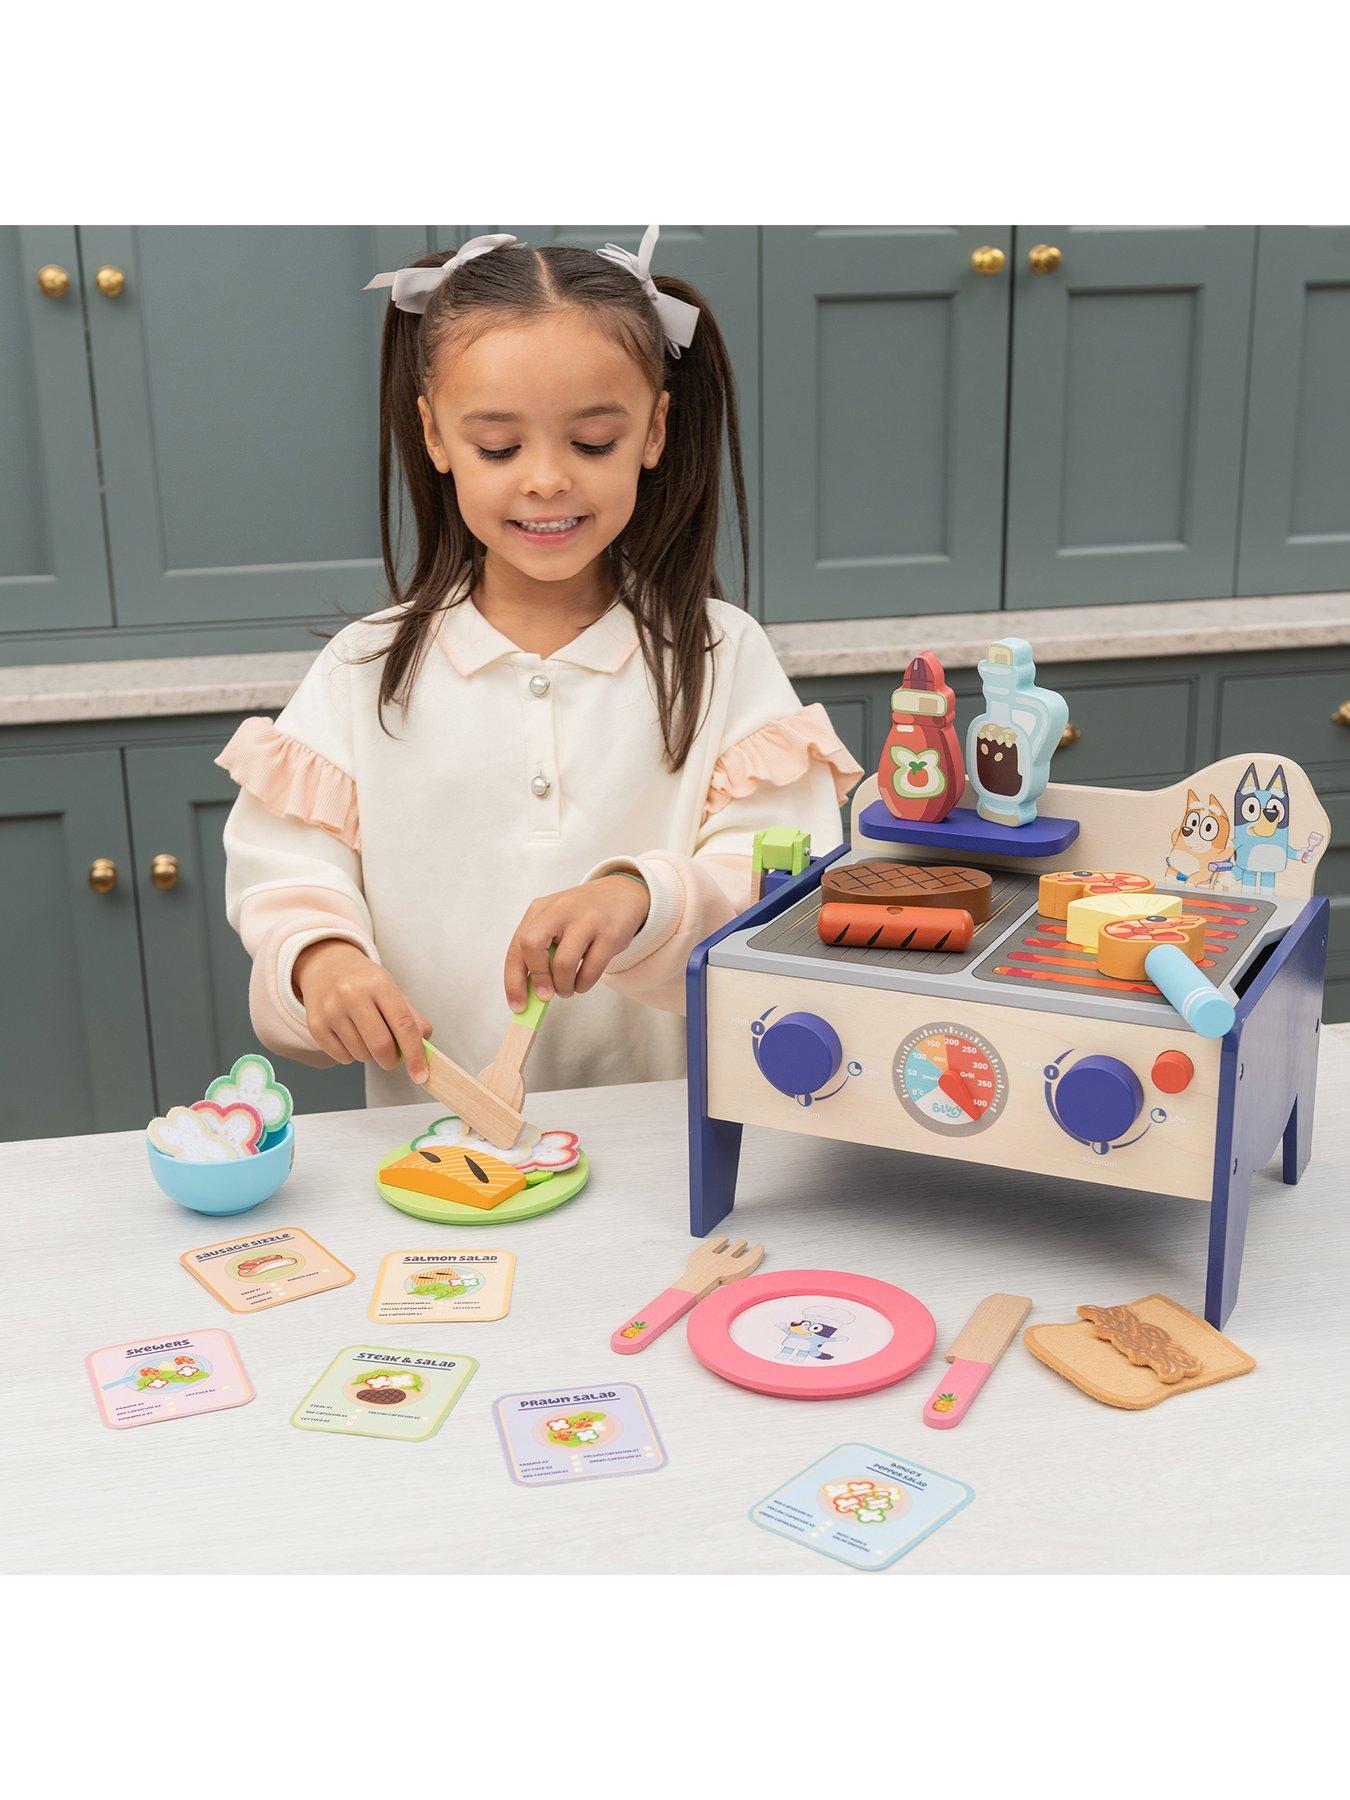 Wooden Bakery Playset Pretend Stand for Kids - 25 Piece Bake Shop Counter w  Food, Chalkboard, Cash Register, Trays - Durable Construction for Creative  Playtime 